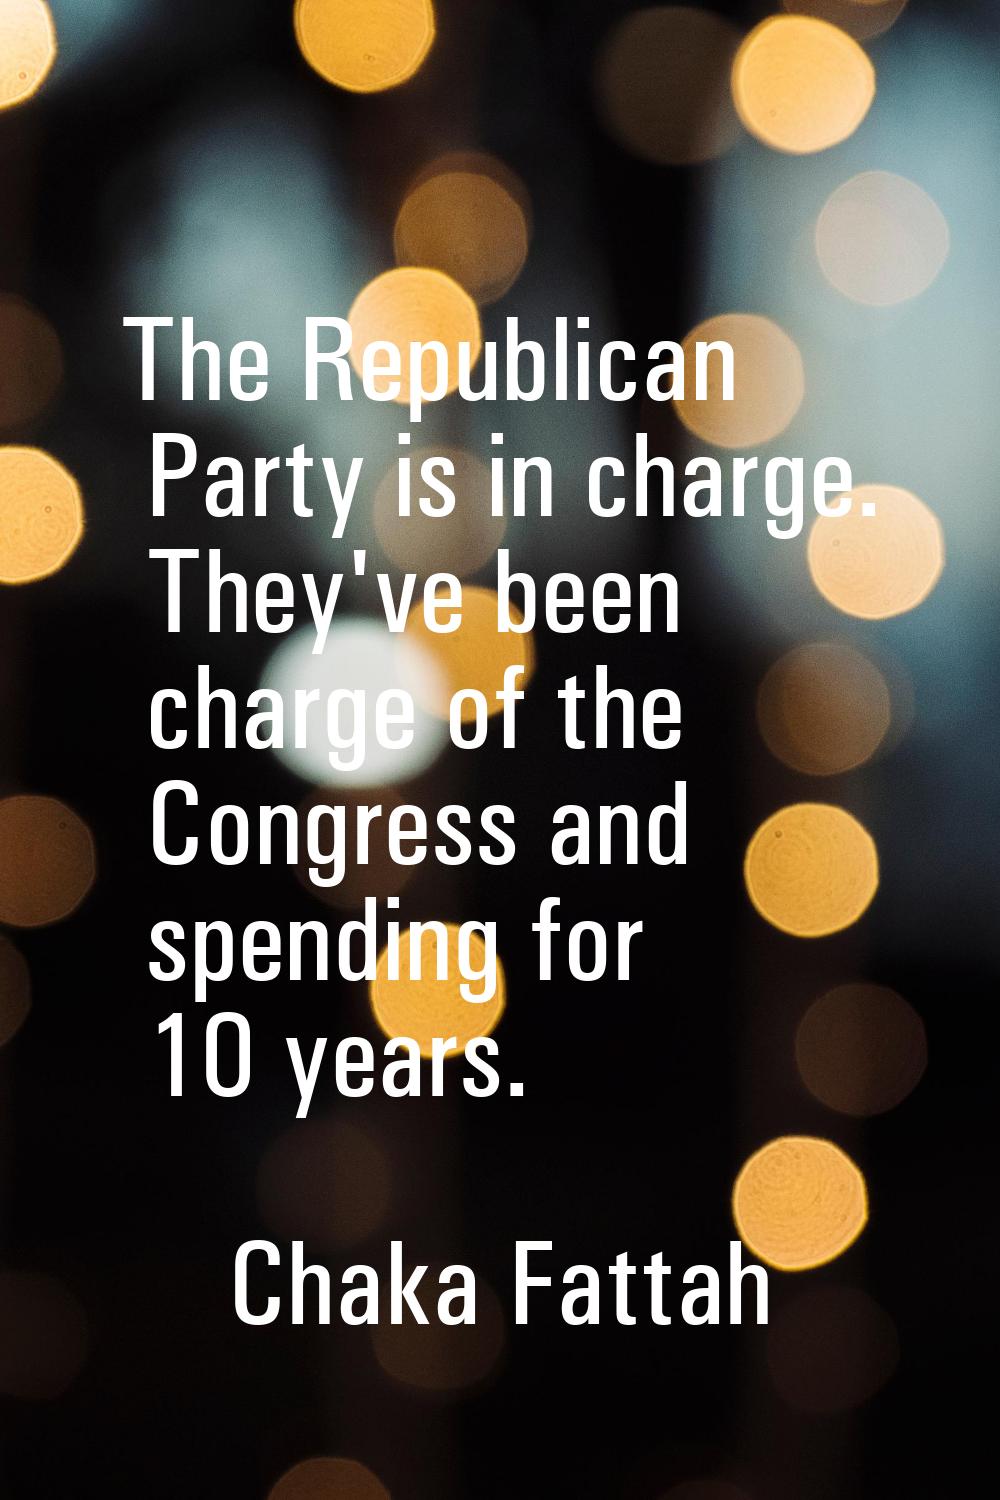 The Republican Party is in charge. They've been charge of the Congress and spending for 10 years.